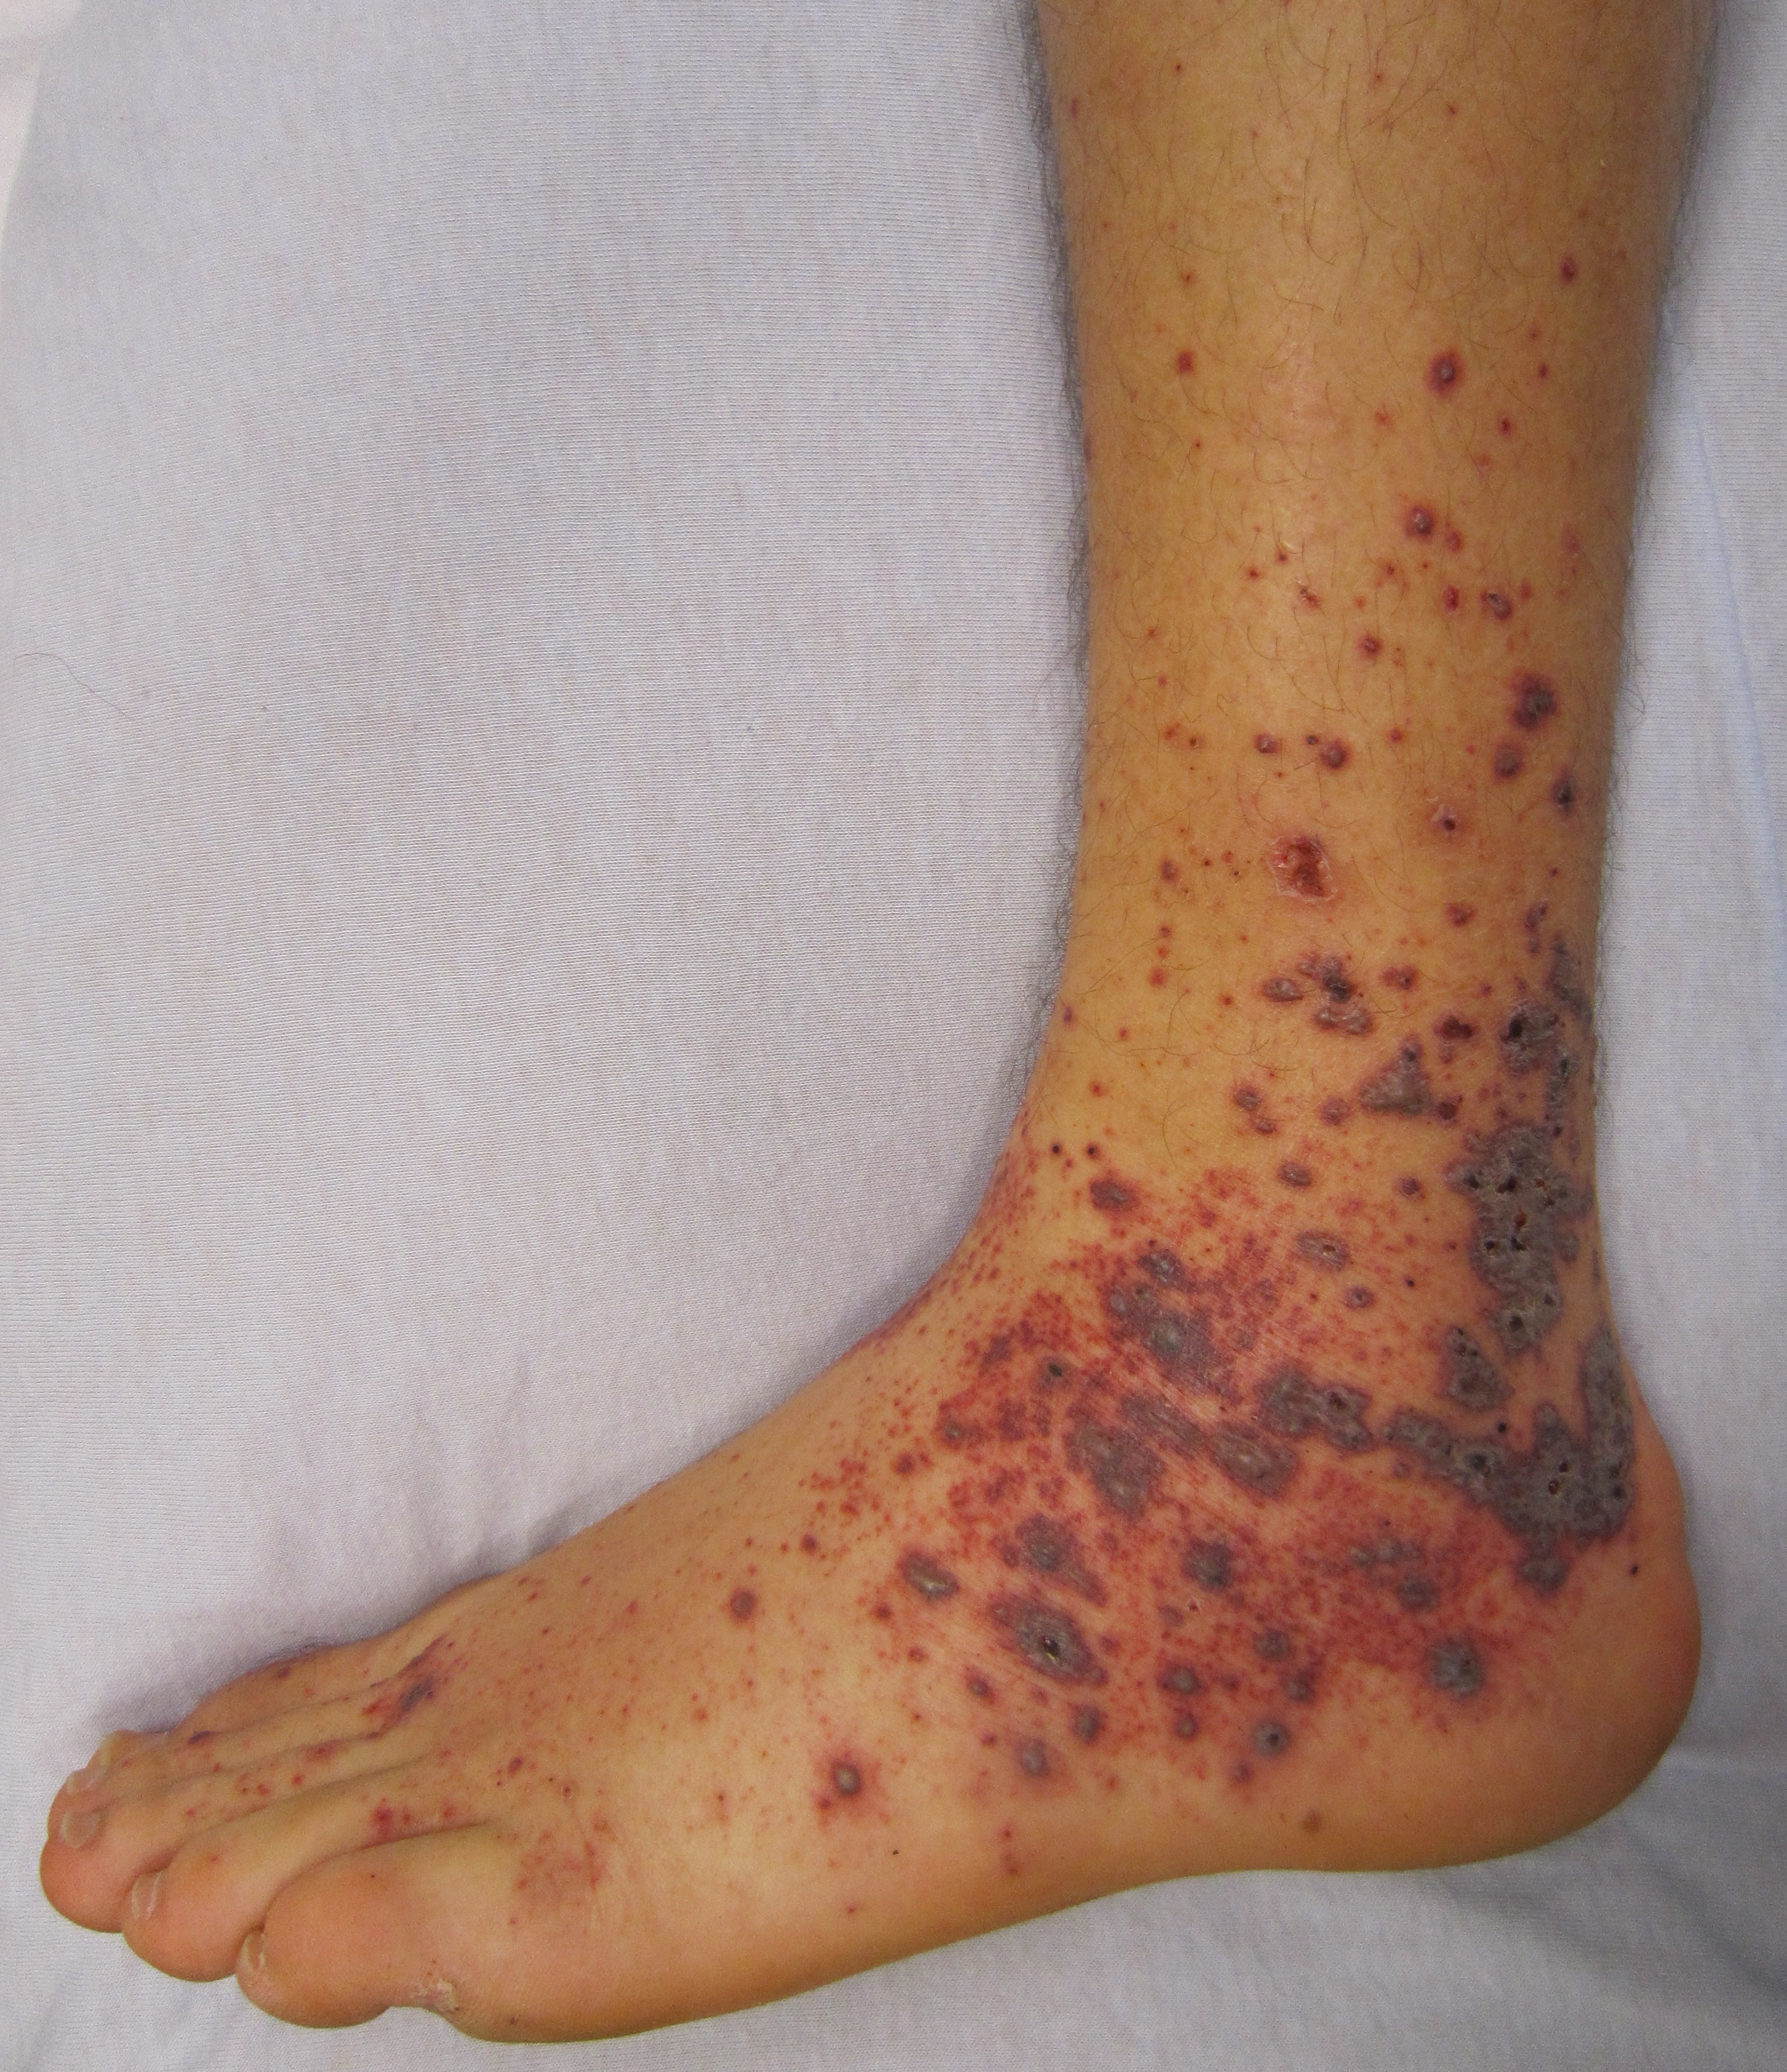 What are some visual characteristics of scabies rash?